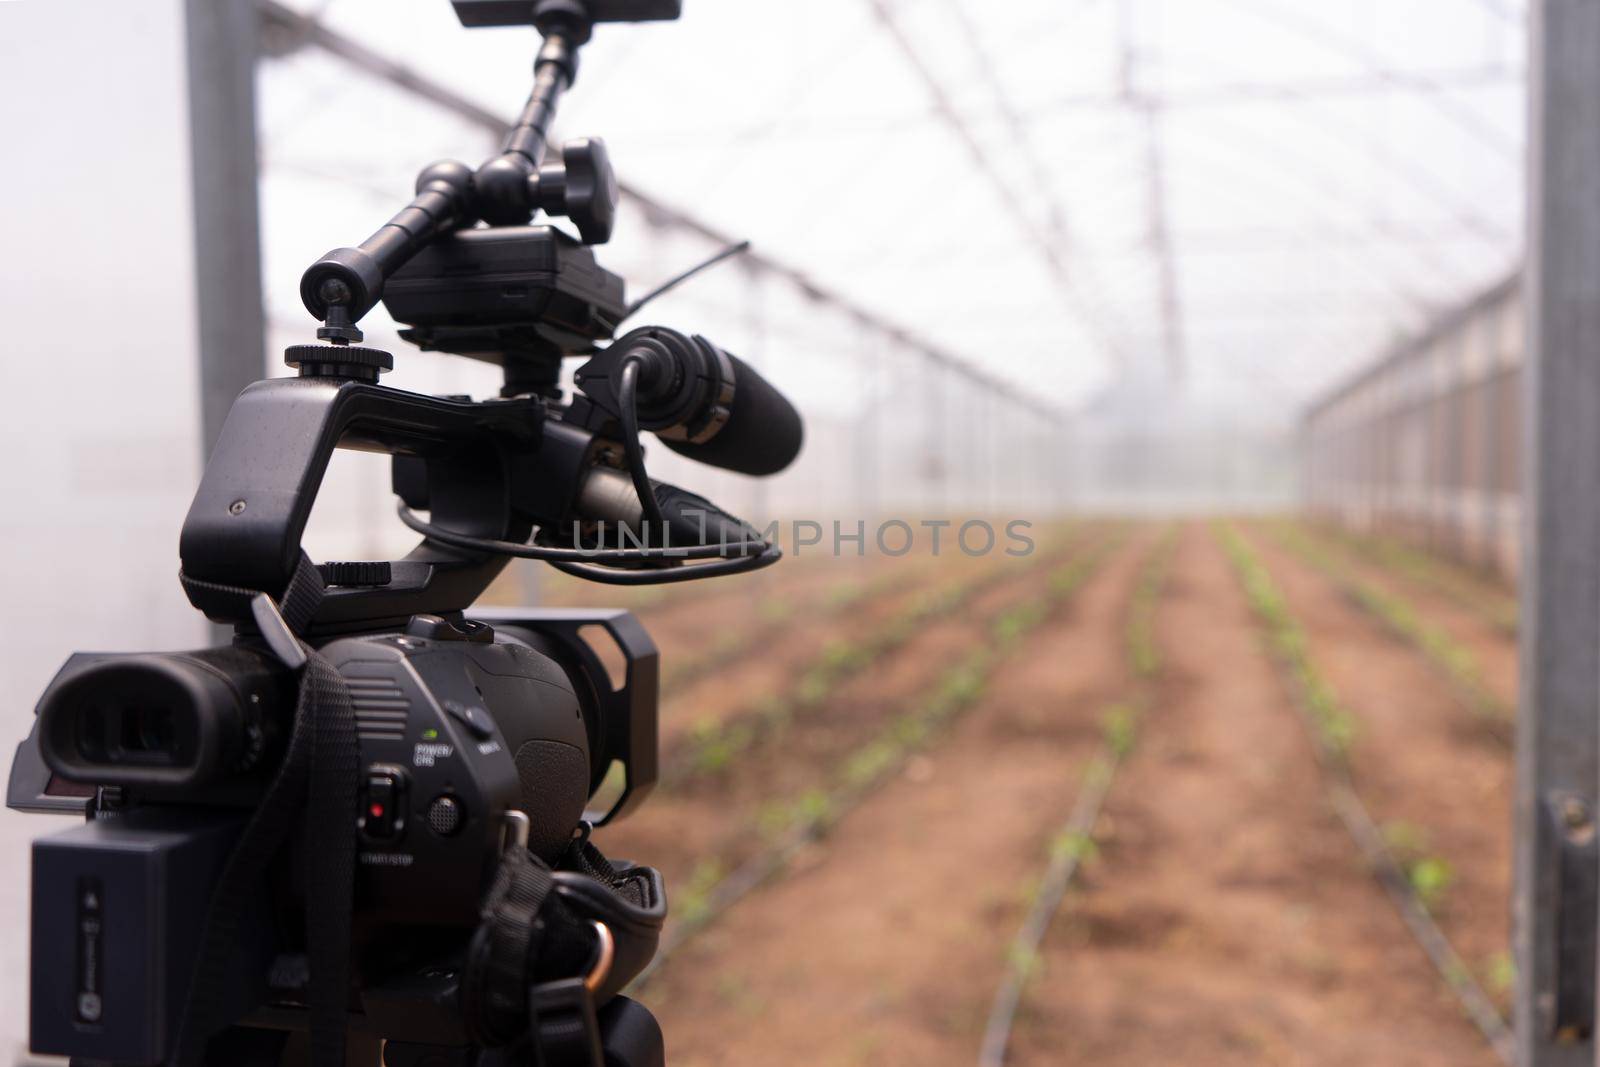 Camera filming a vegetable plantation inside a greenhouse with a controlled irrigation and temperature environment